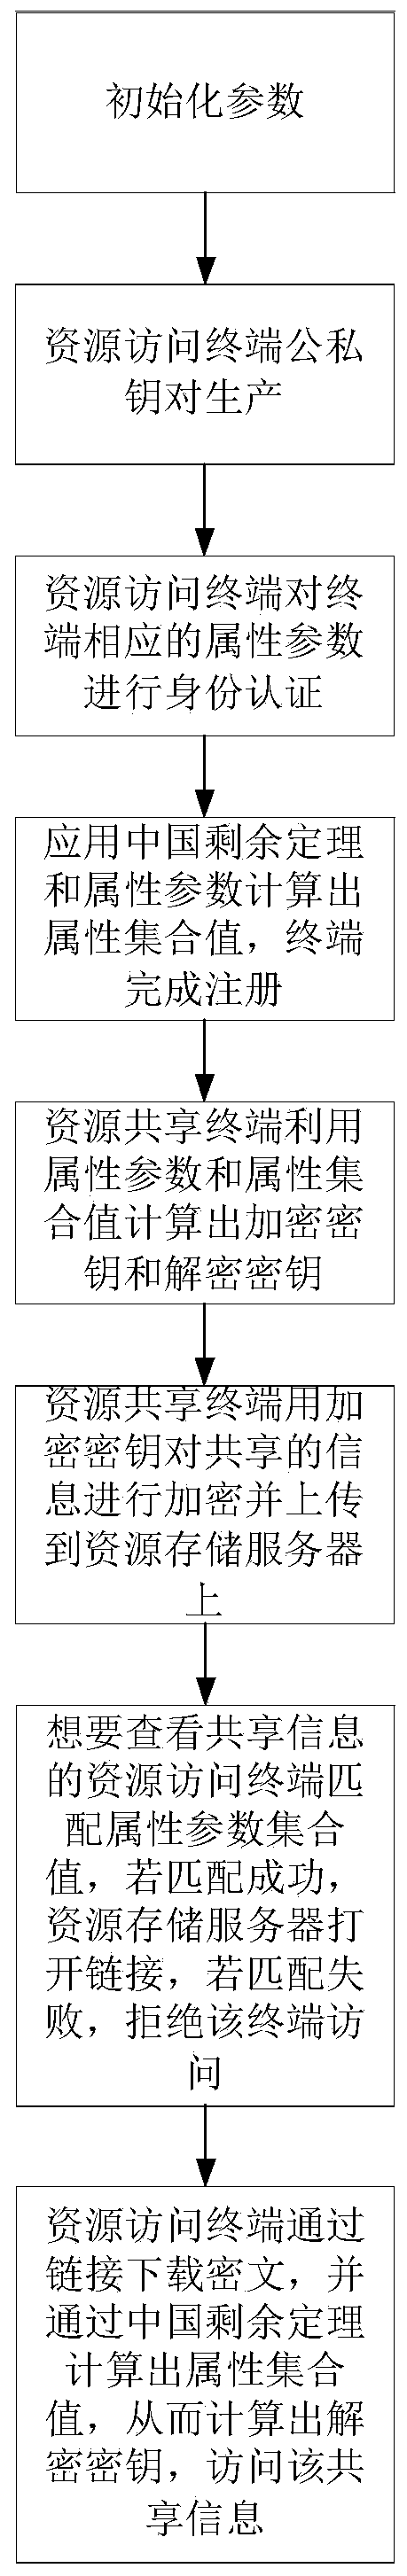 Book resource access control method based on Chinese remainder theorem